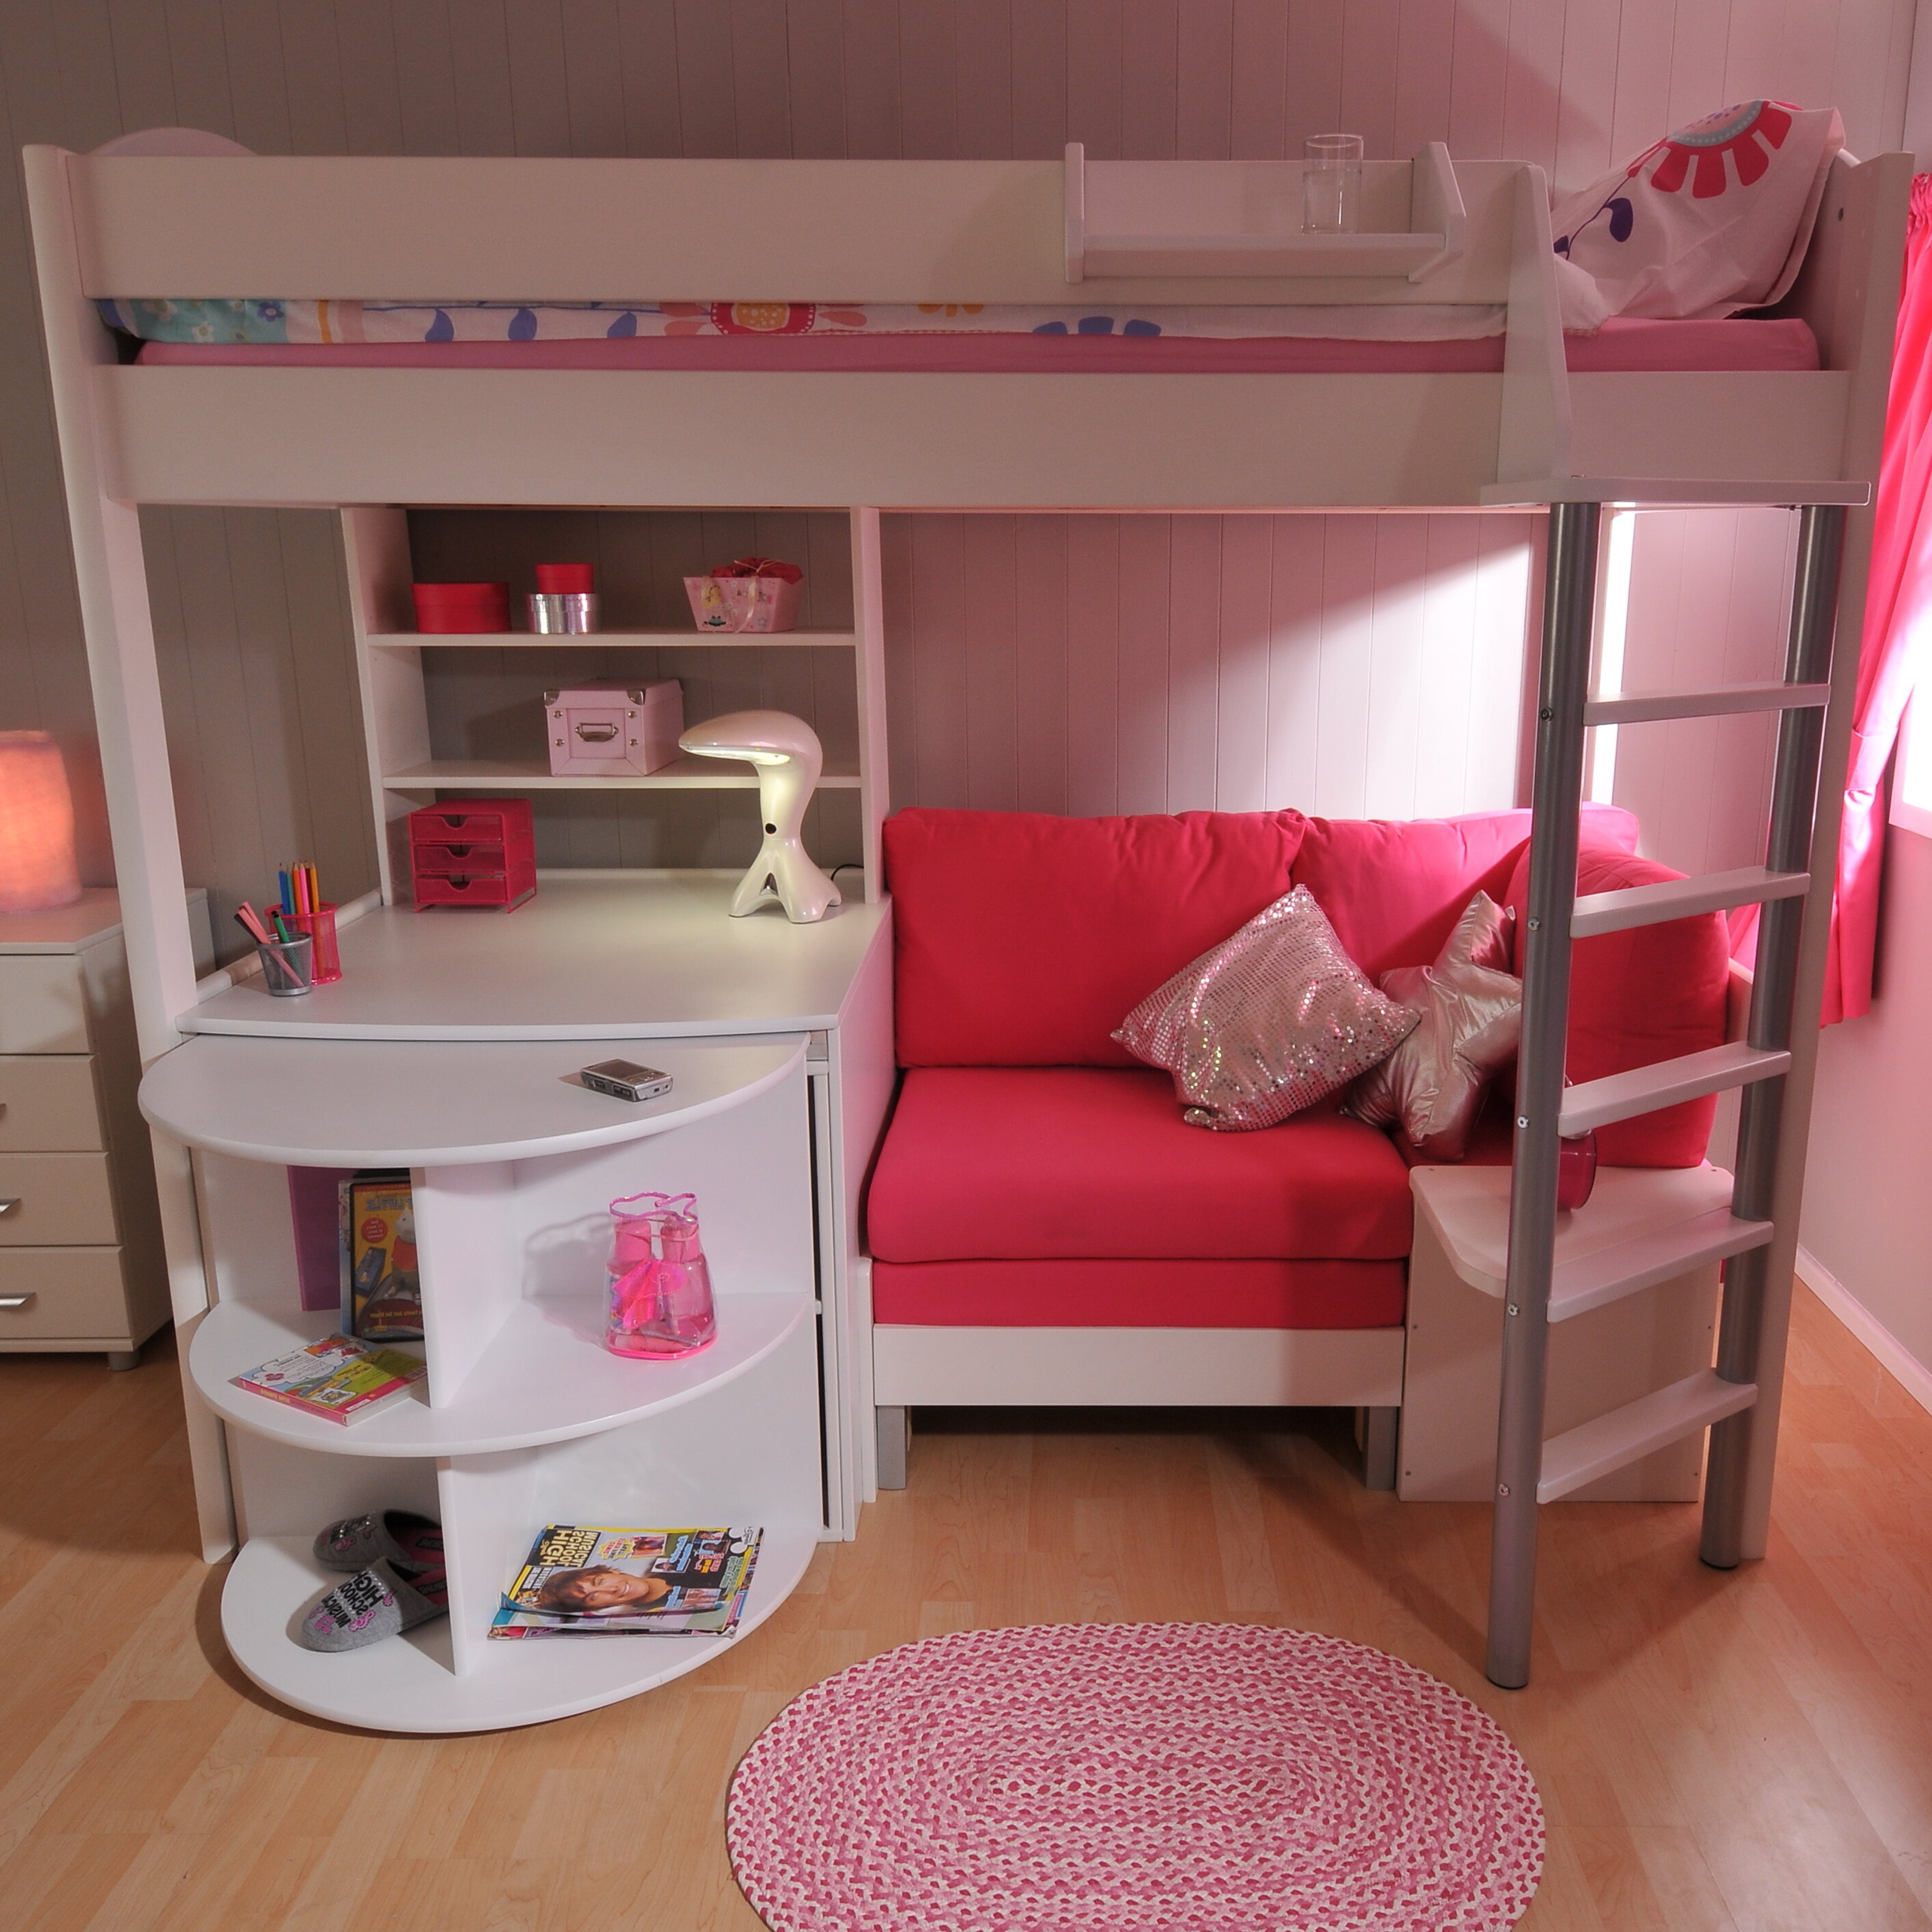 Bed shelving